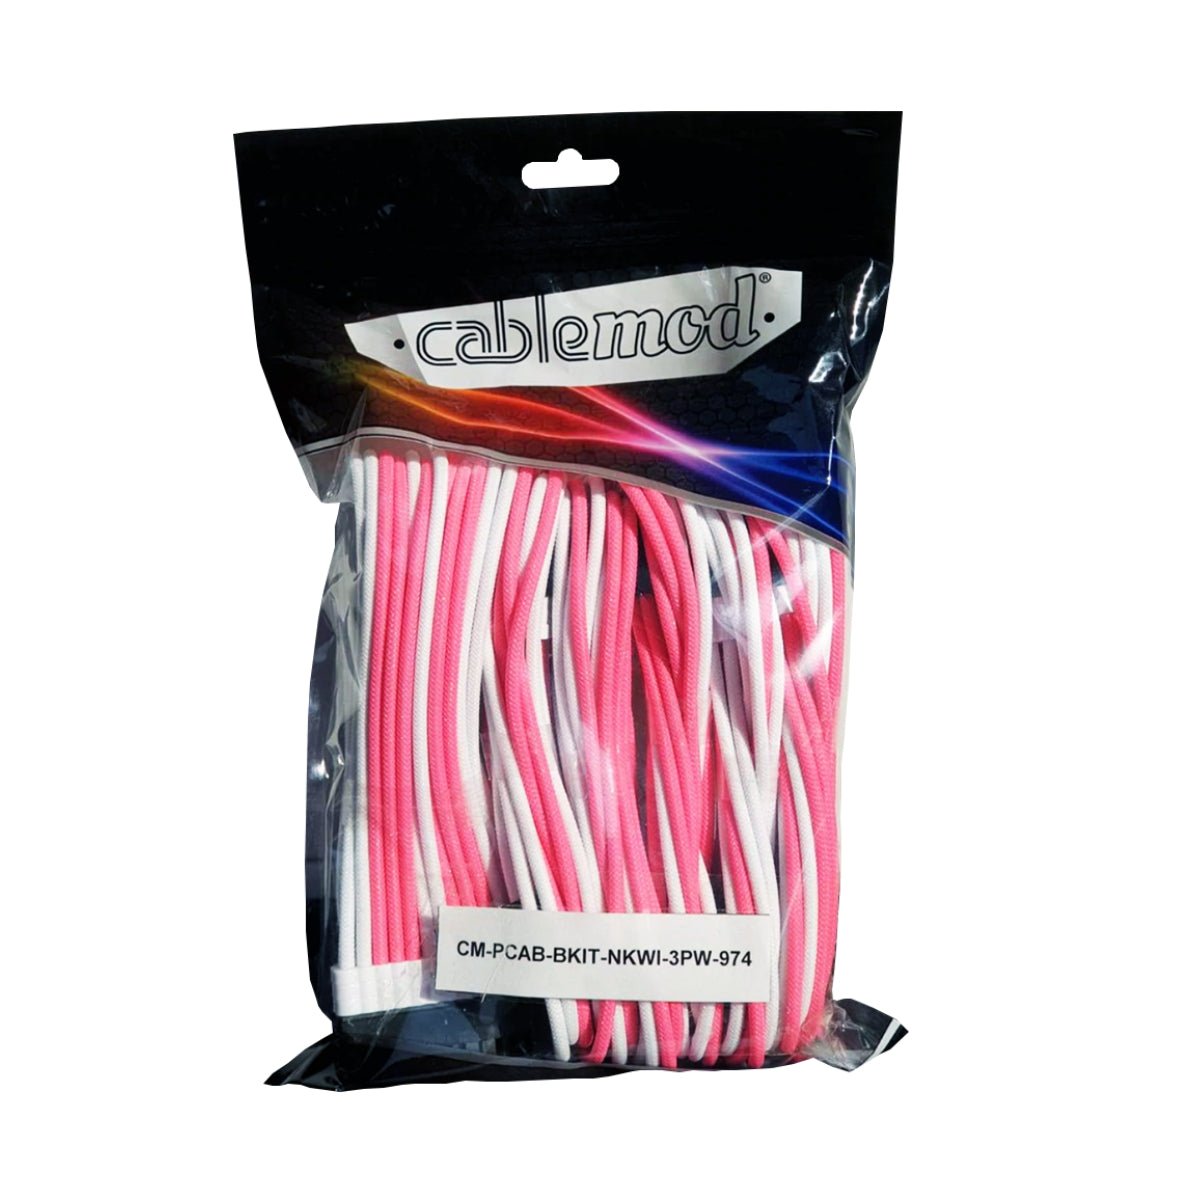 CableMod - ModMesh PRO Cable Extension Kit - 974 Edition - White/Pink - Store 974 | ستور ٩٧٤